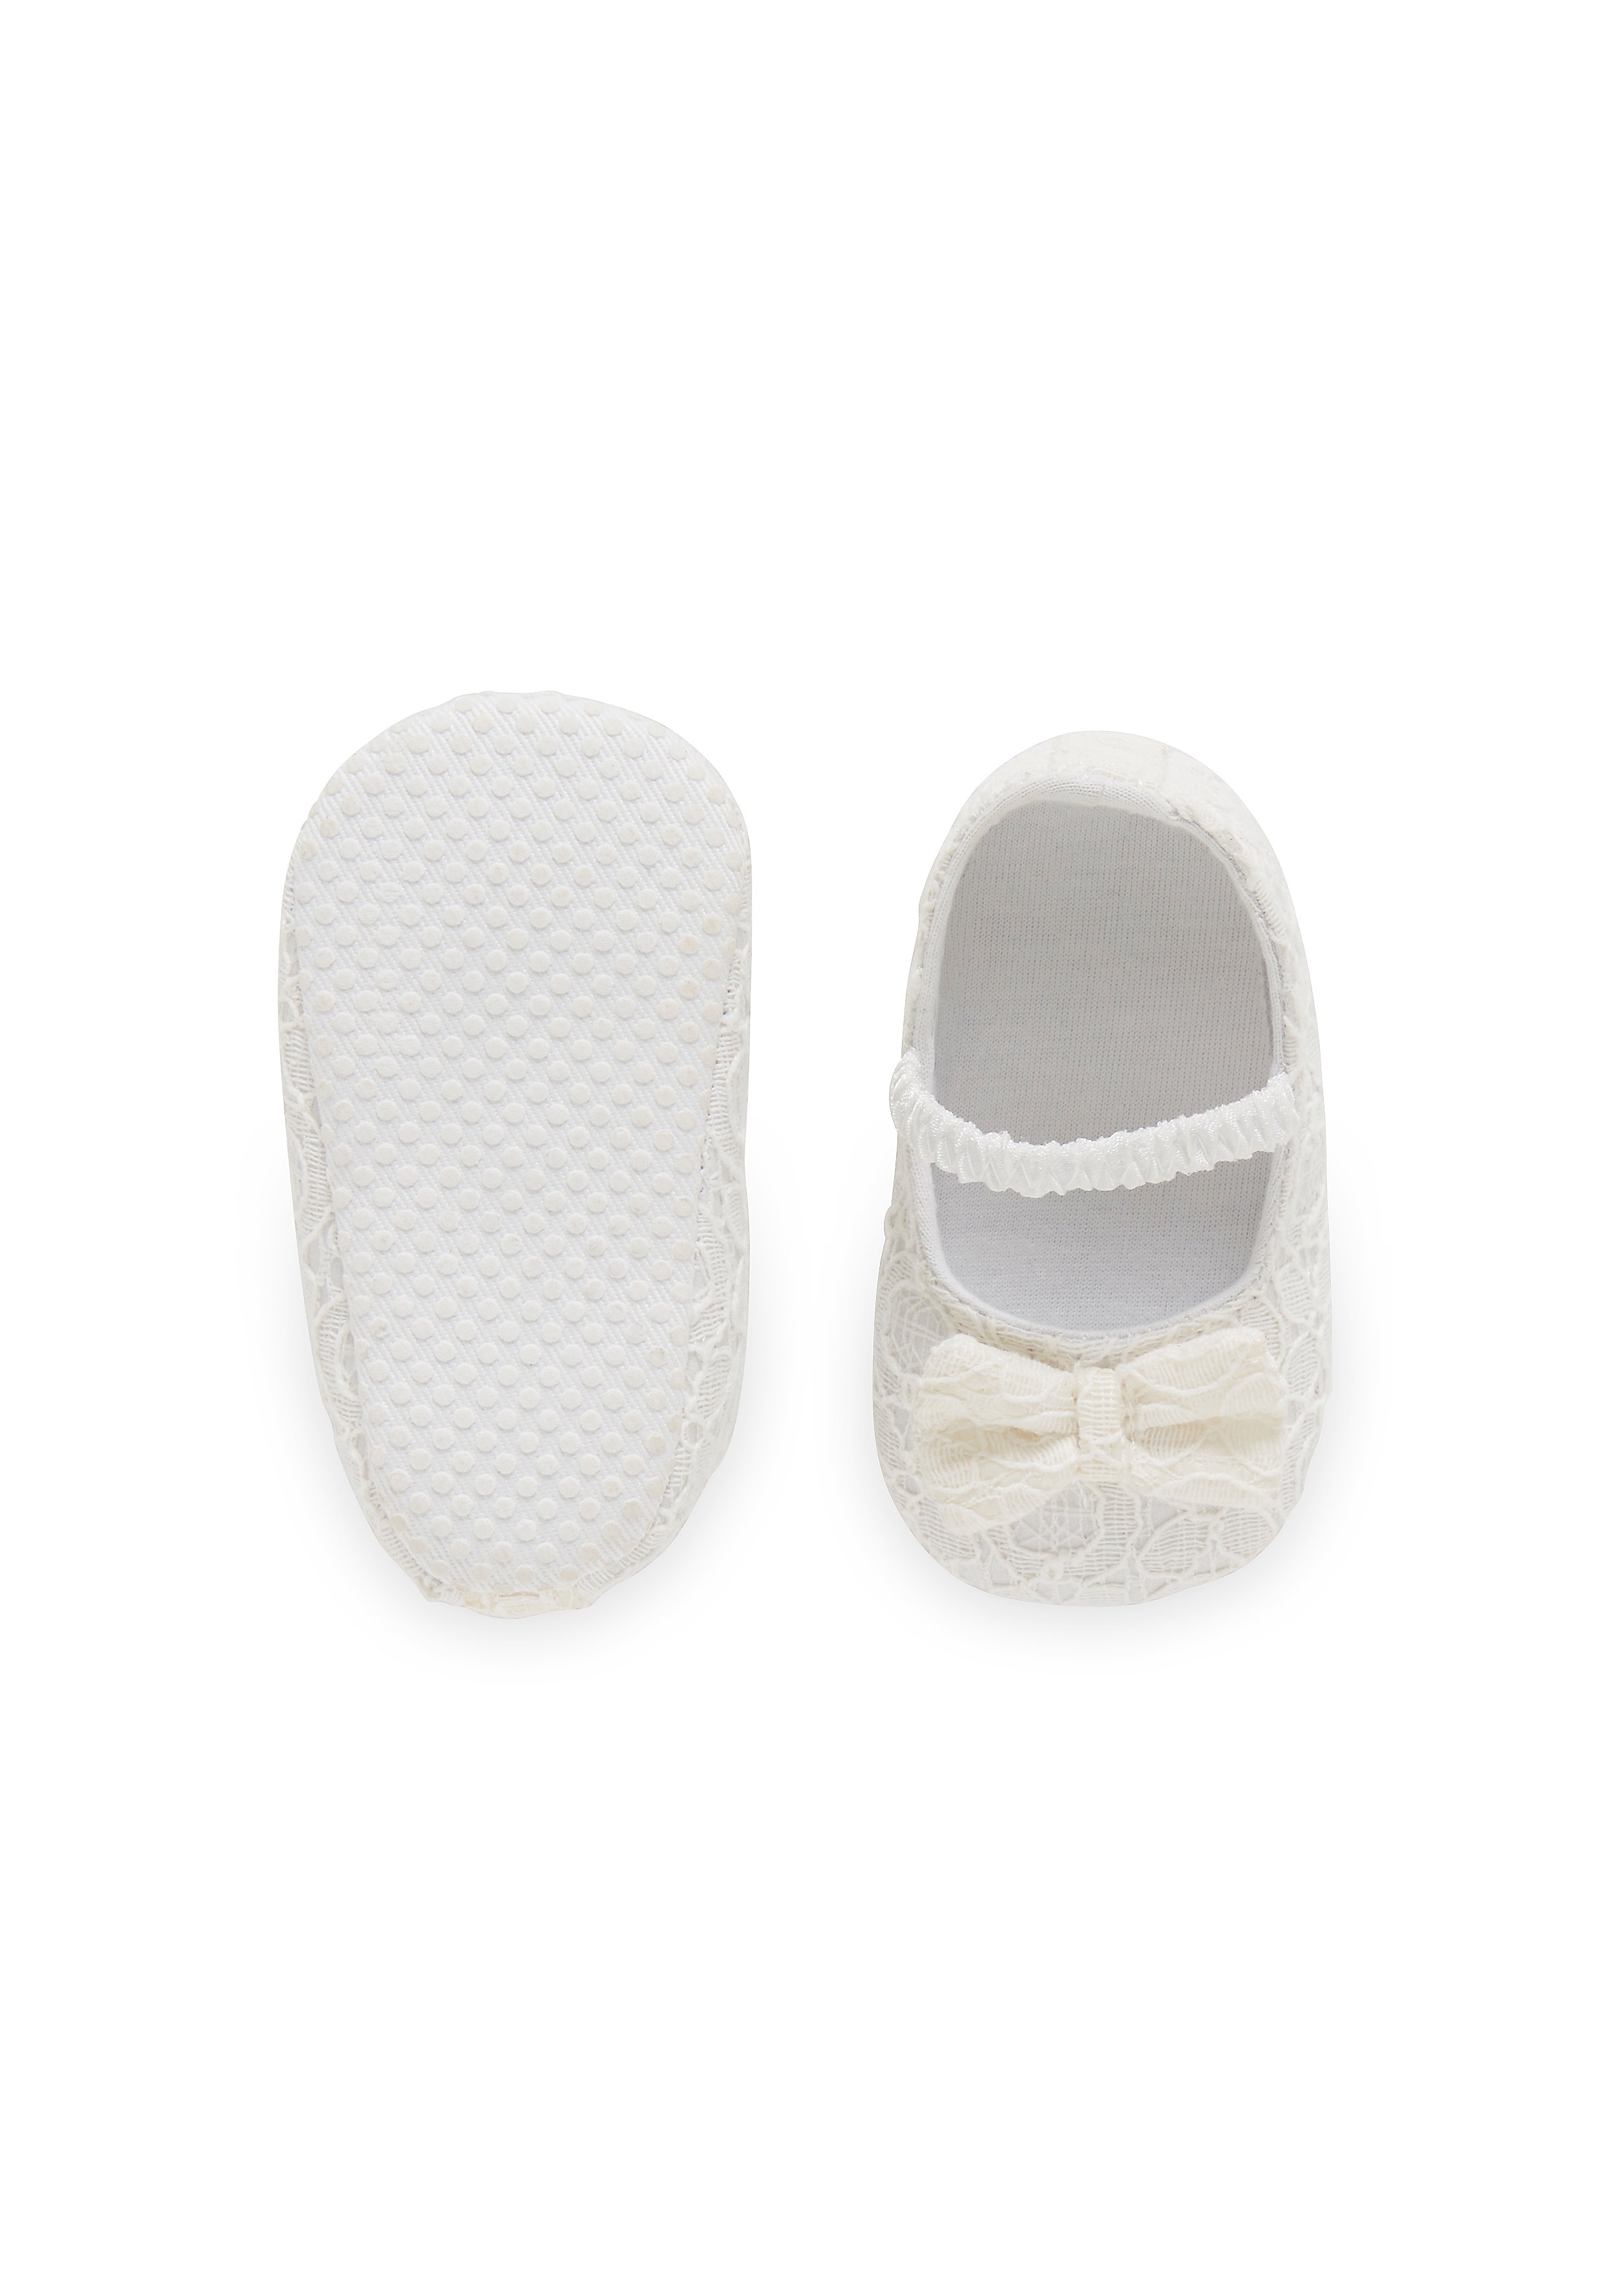 Mothercare | Girls Lace Occasion Shoes - Cream 2